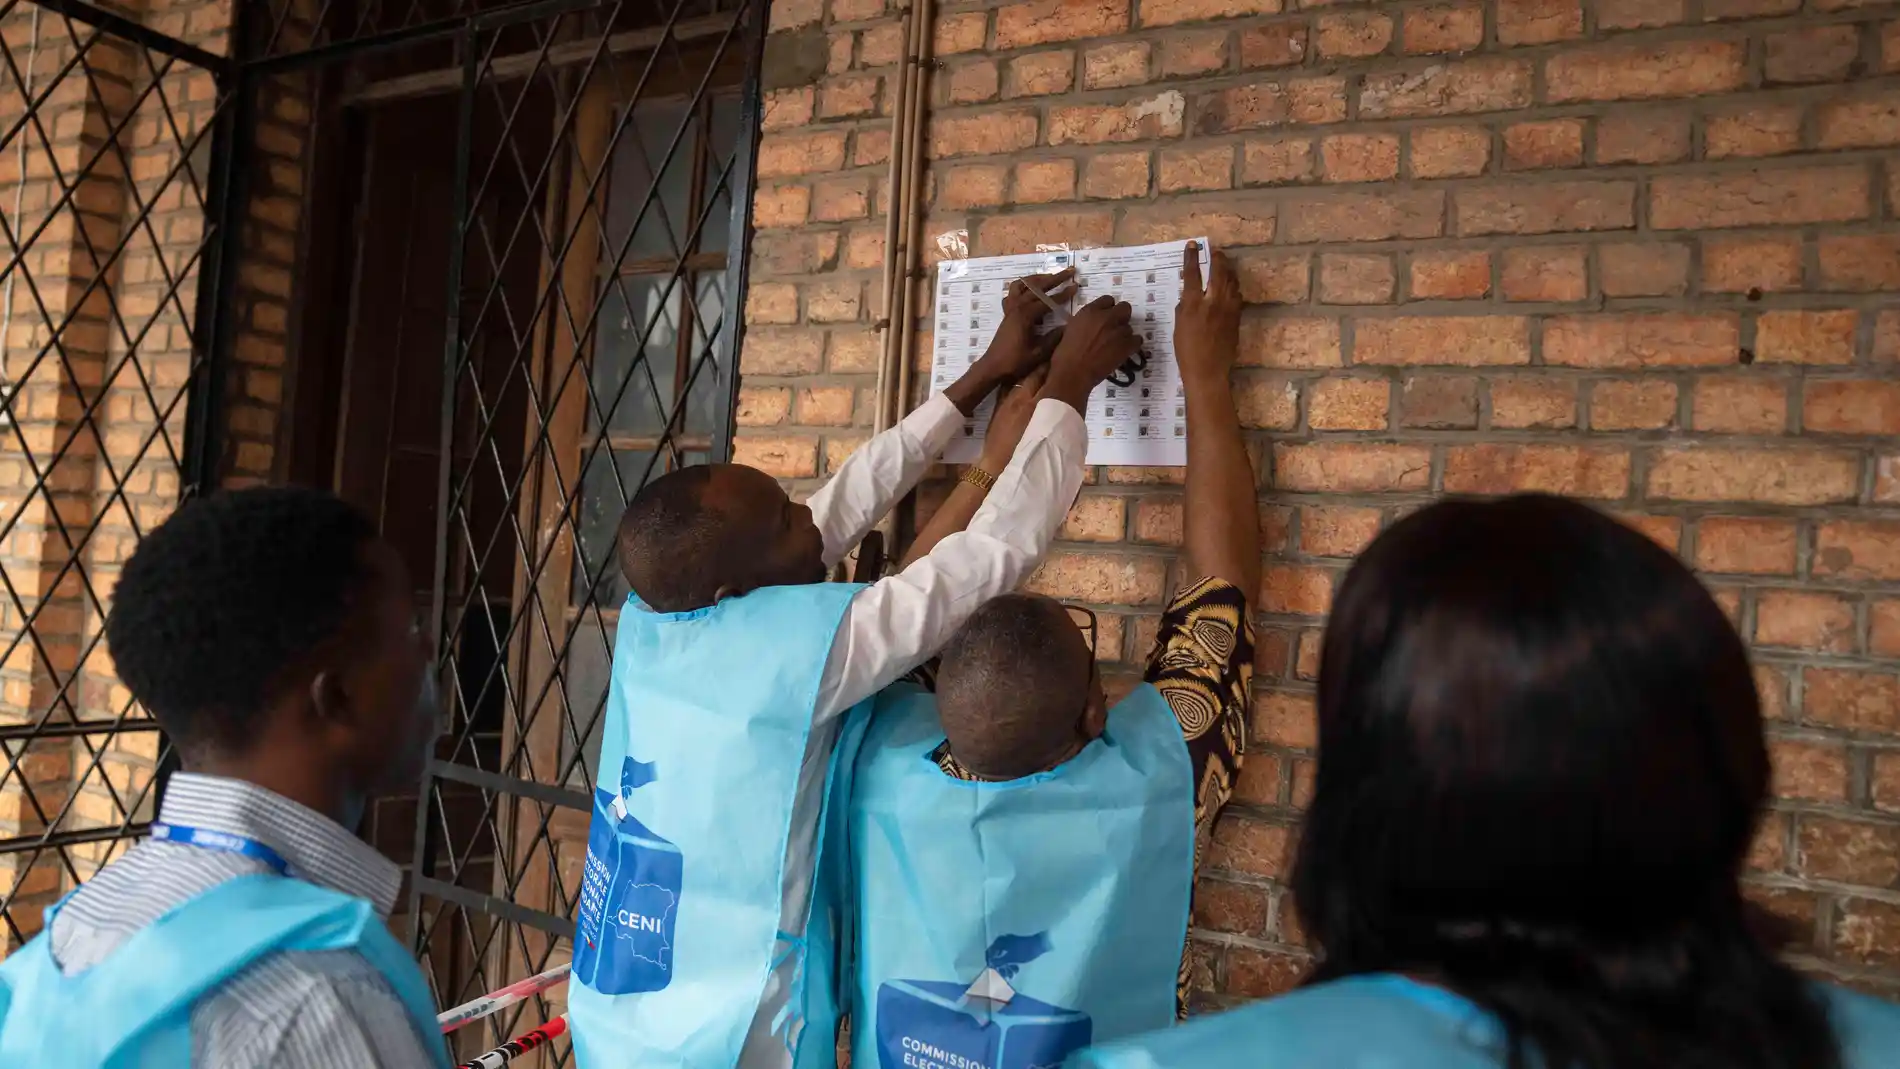 Election officials put up voters lists outside a voting station during the presidential elections in Kinshasa, Democratic Republic of Congo, Wednesday, Dec. 20, 2023. Congo headed to the polls Wednesday to vote for president as authorities scrambled to finalise preparations in an election facing steep logistical and security challenges. (AP Photo/Mosa'ab Elshamy)